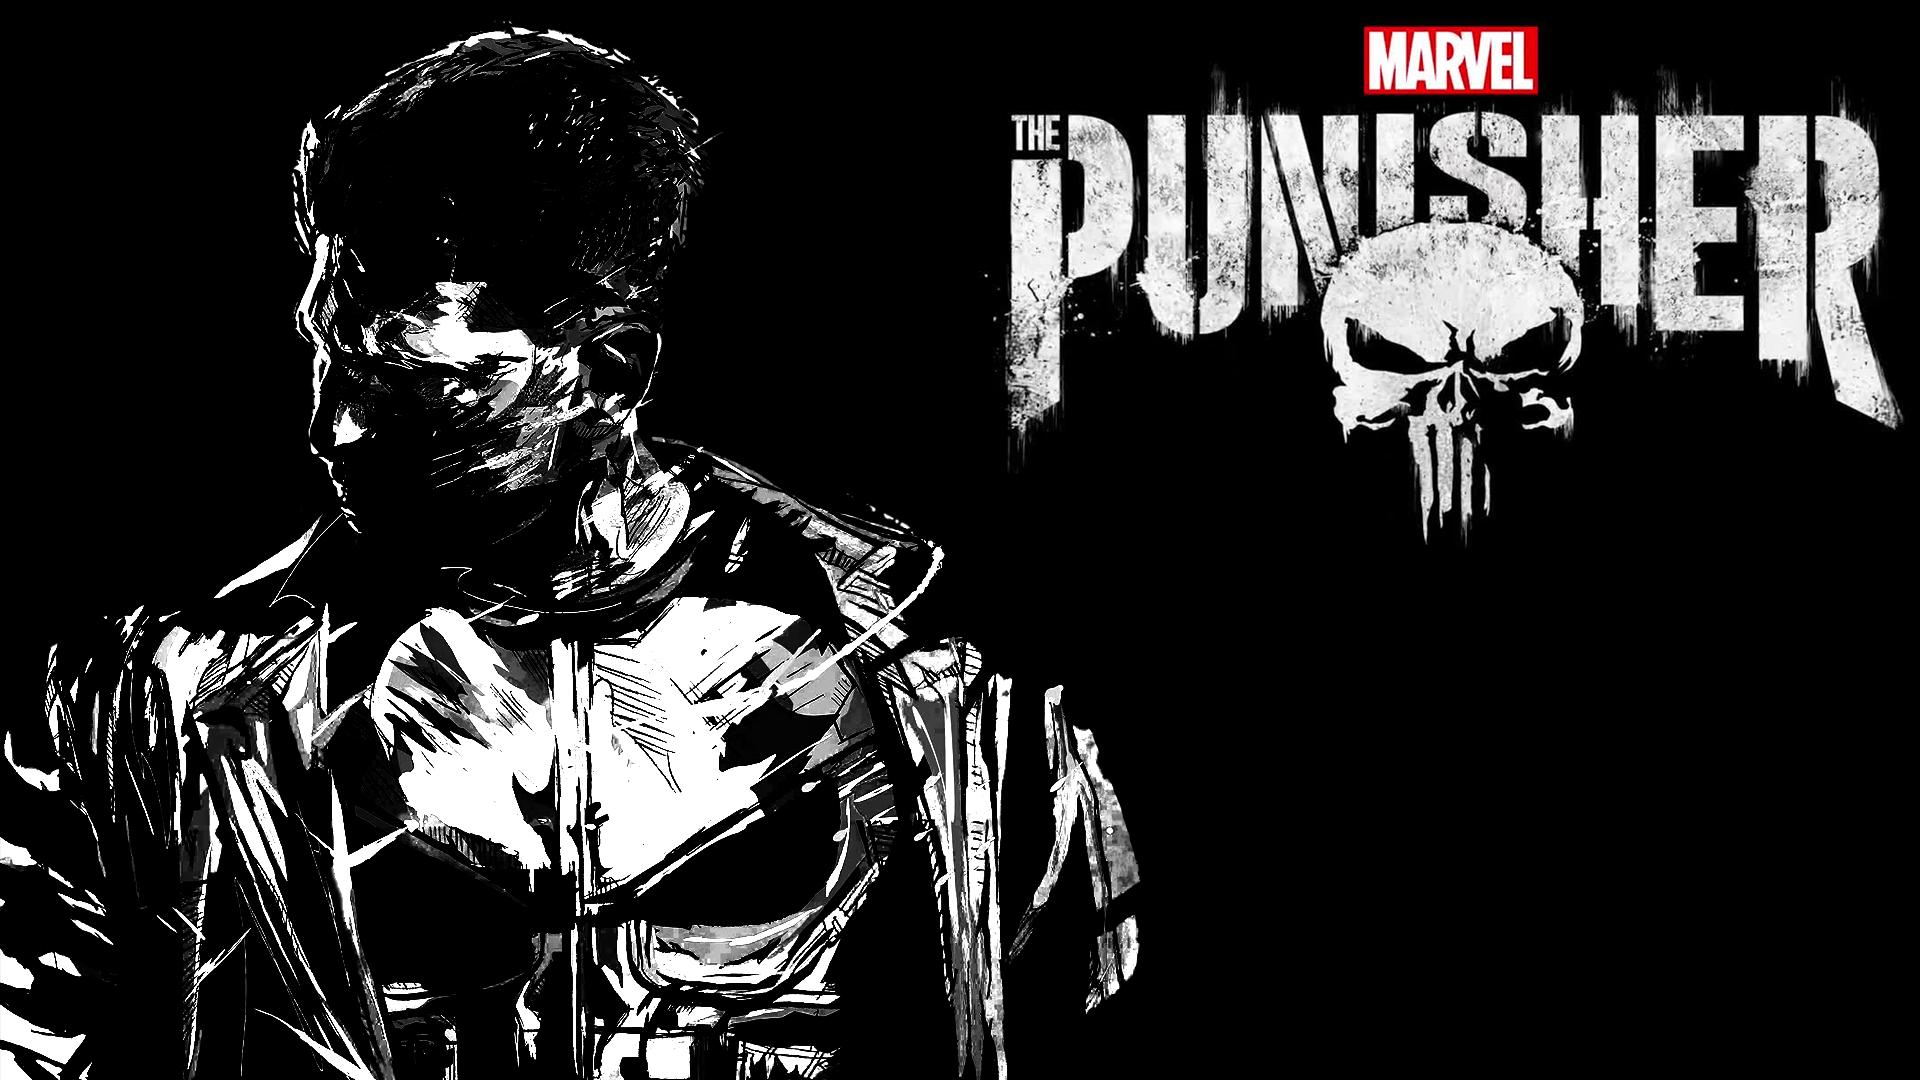 The Punisher [1920x1080] #Music #IndieArtist #Chicago. Punisher, Marvel comic books, Marvel entertainment